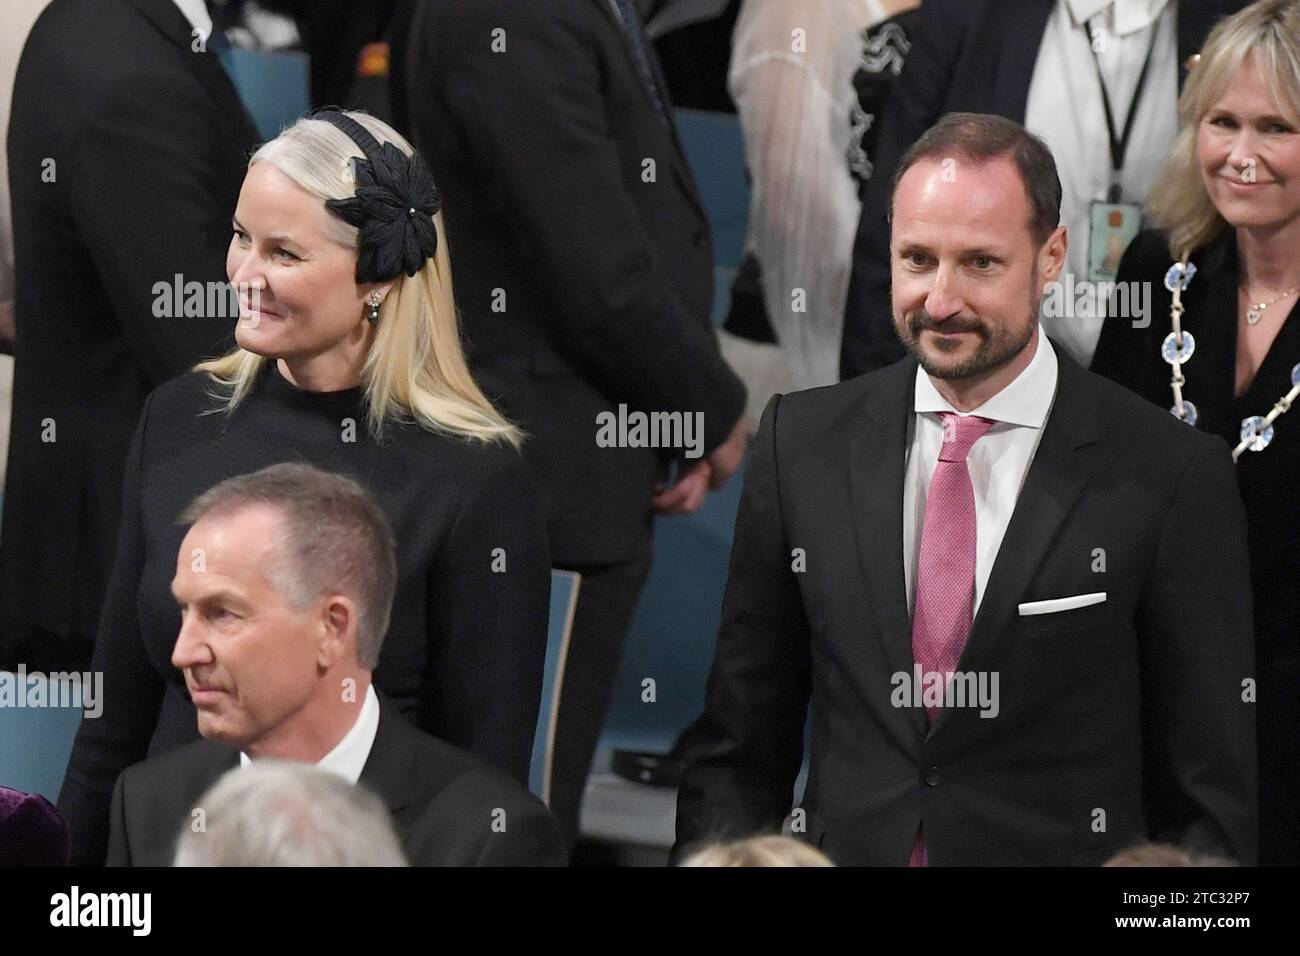 Oslo, Norway. 10th Dec, 2023. Crown Prince Haakon and Crown Princess Mette-Marit attend The Nobel Peace Prize ceremony for Iranian activist Narges Mohammadi at the Nobel Institute in Oslo, Norway. 2023 Nobel Peace Prize winner Narges Mohammadi is imprisoned and is therefore represented by her family. Mohammadi receives the peace prize for her fight against the oppression of women in Iran and the fight for human rights and freedom for all. December 10, 2023. Photo by Paul Treadway/ Credit: UPI/Alamy Live News Stock Photo